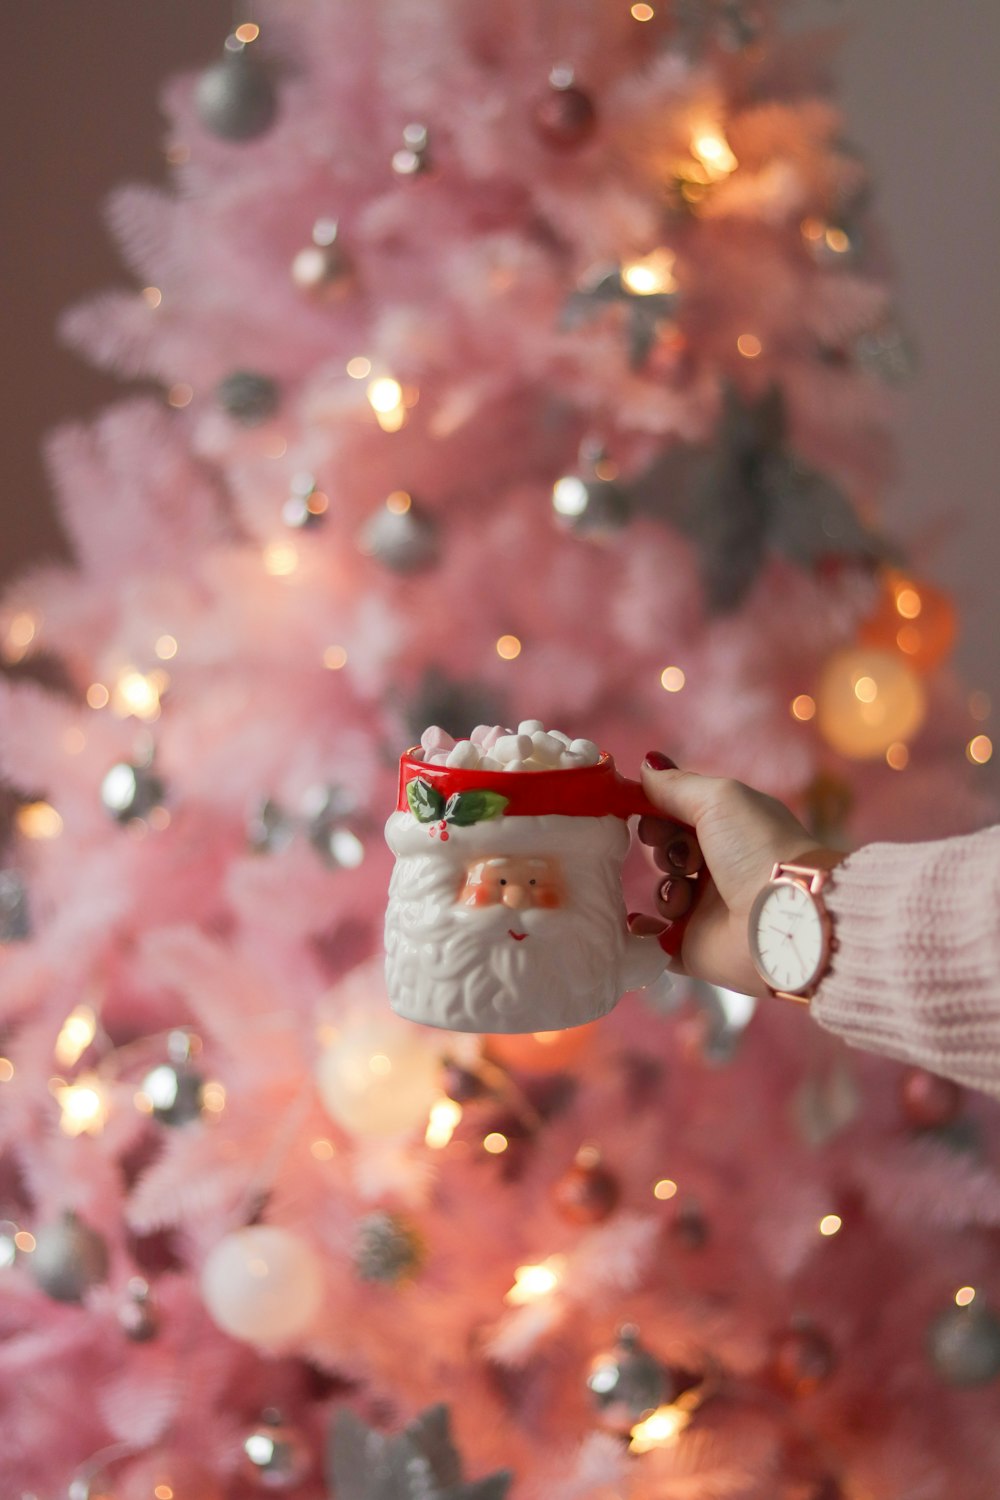 a person holding a mug in front of a pink christmas tree